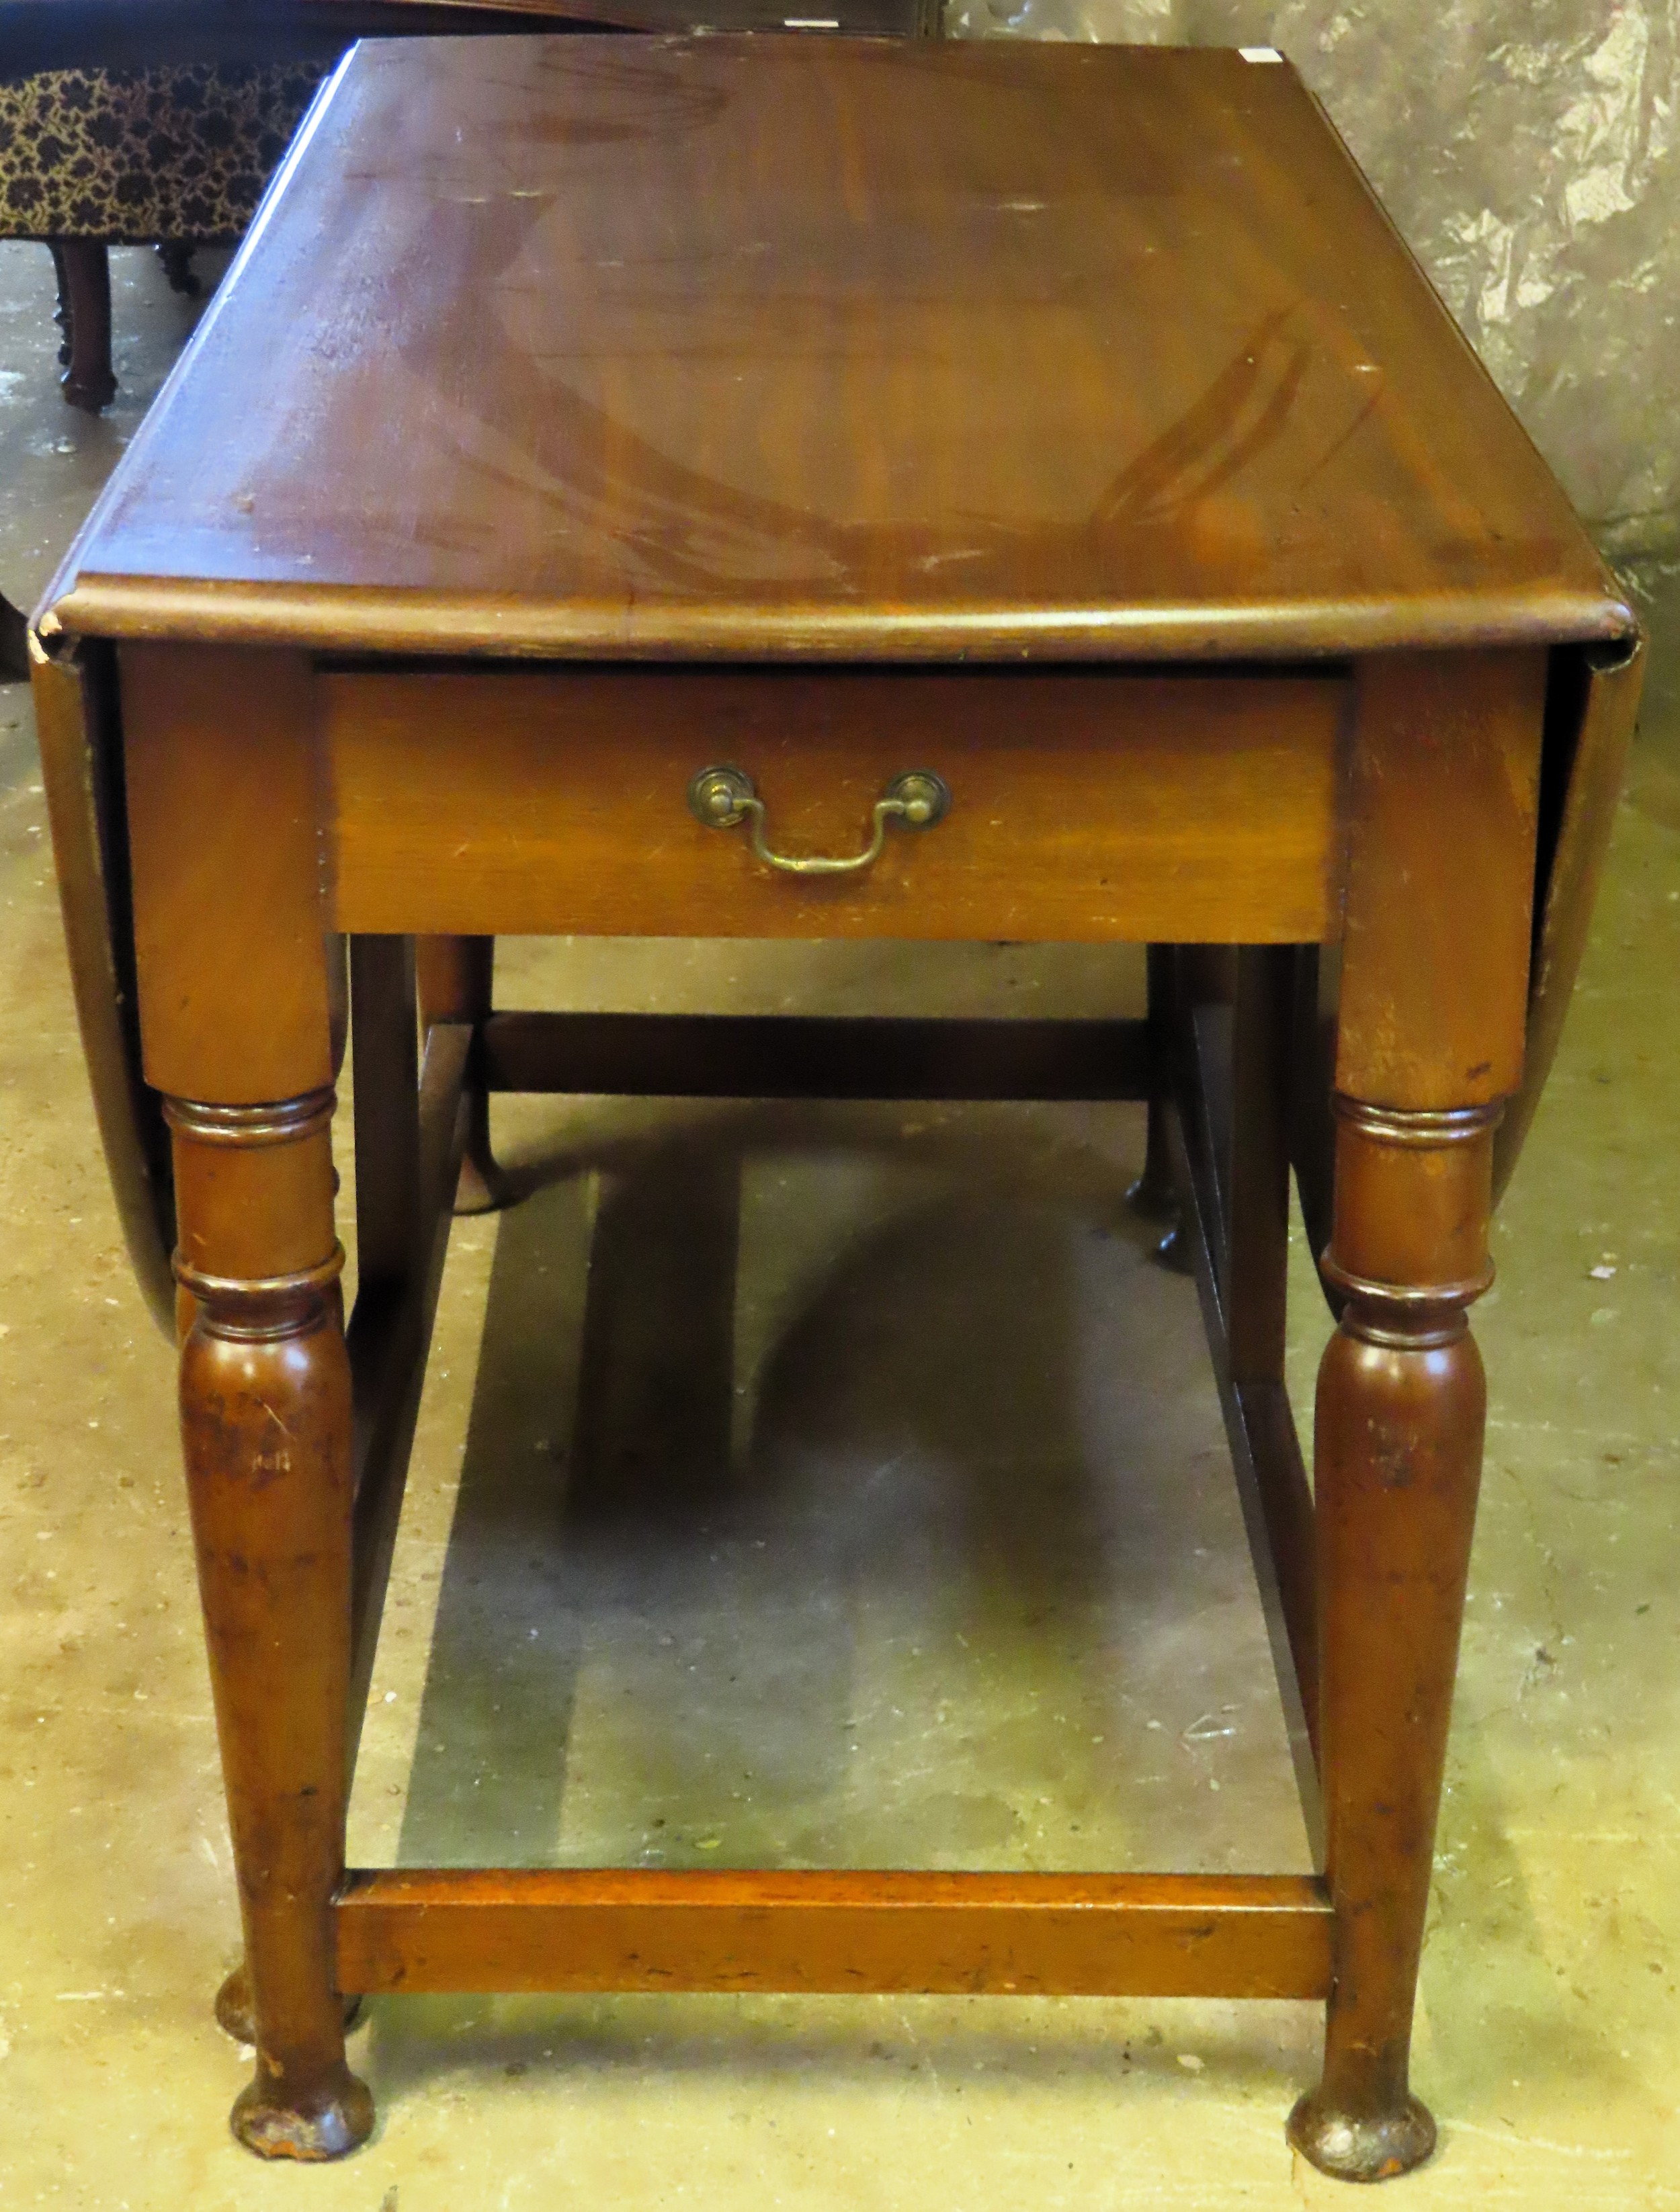 Early 20th century large gateleg dining table with drawers to both sides. Approx. 73cm H x 158cm W x - Image 2 of 2